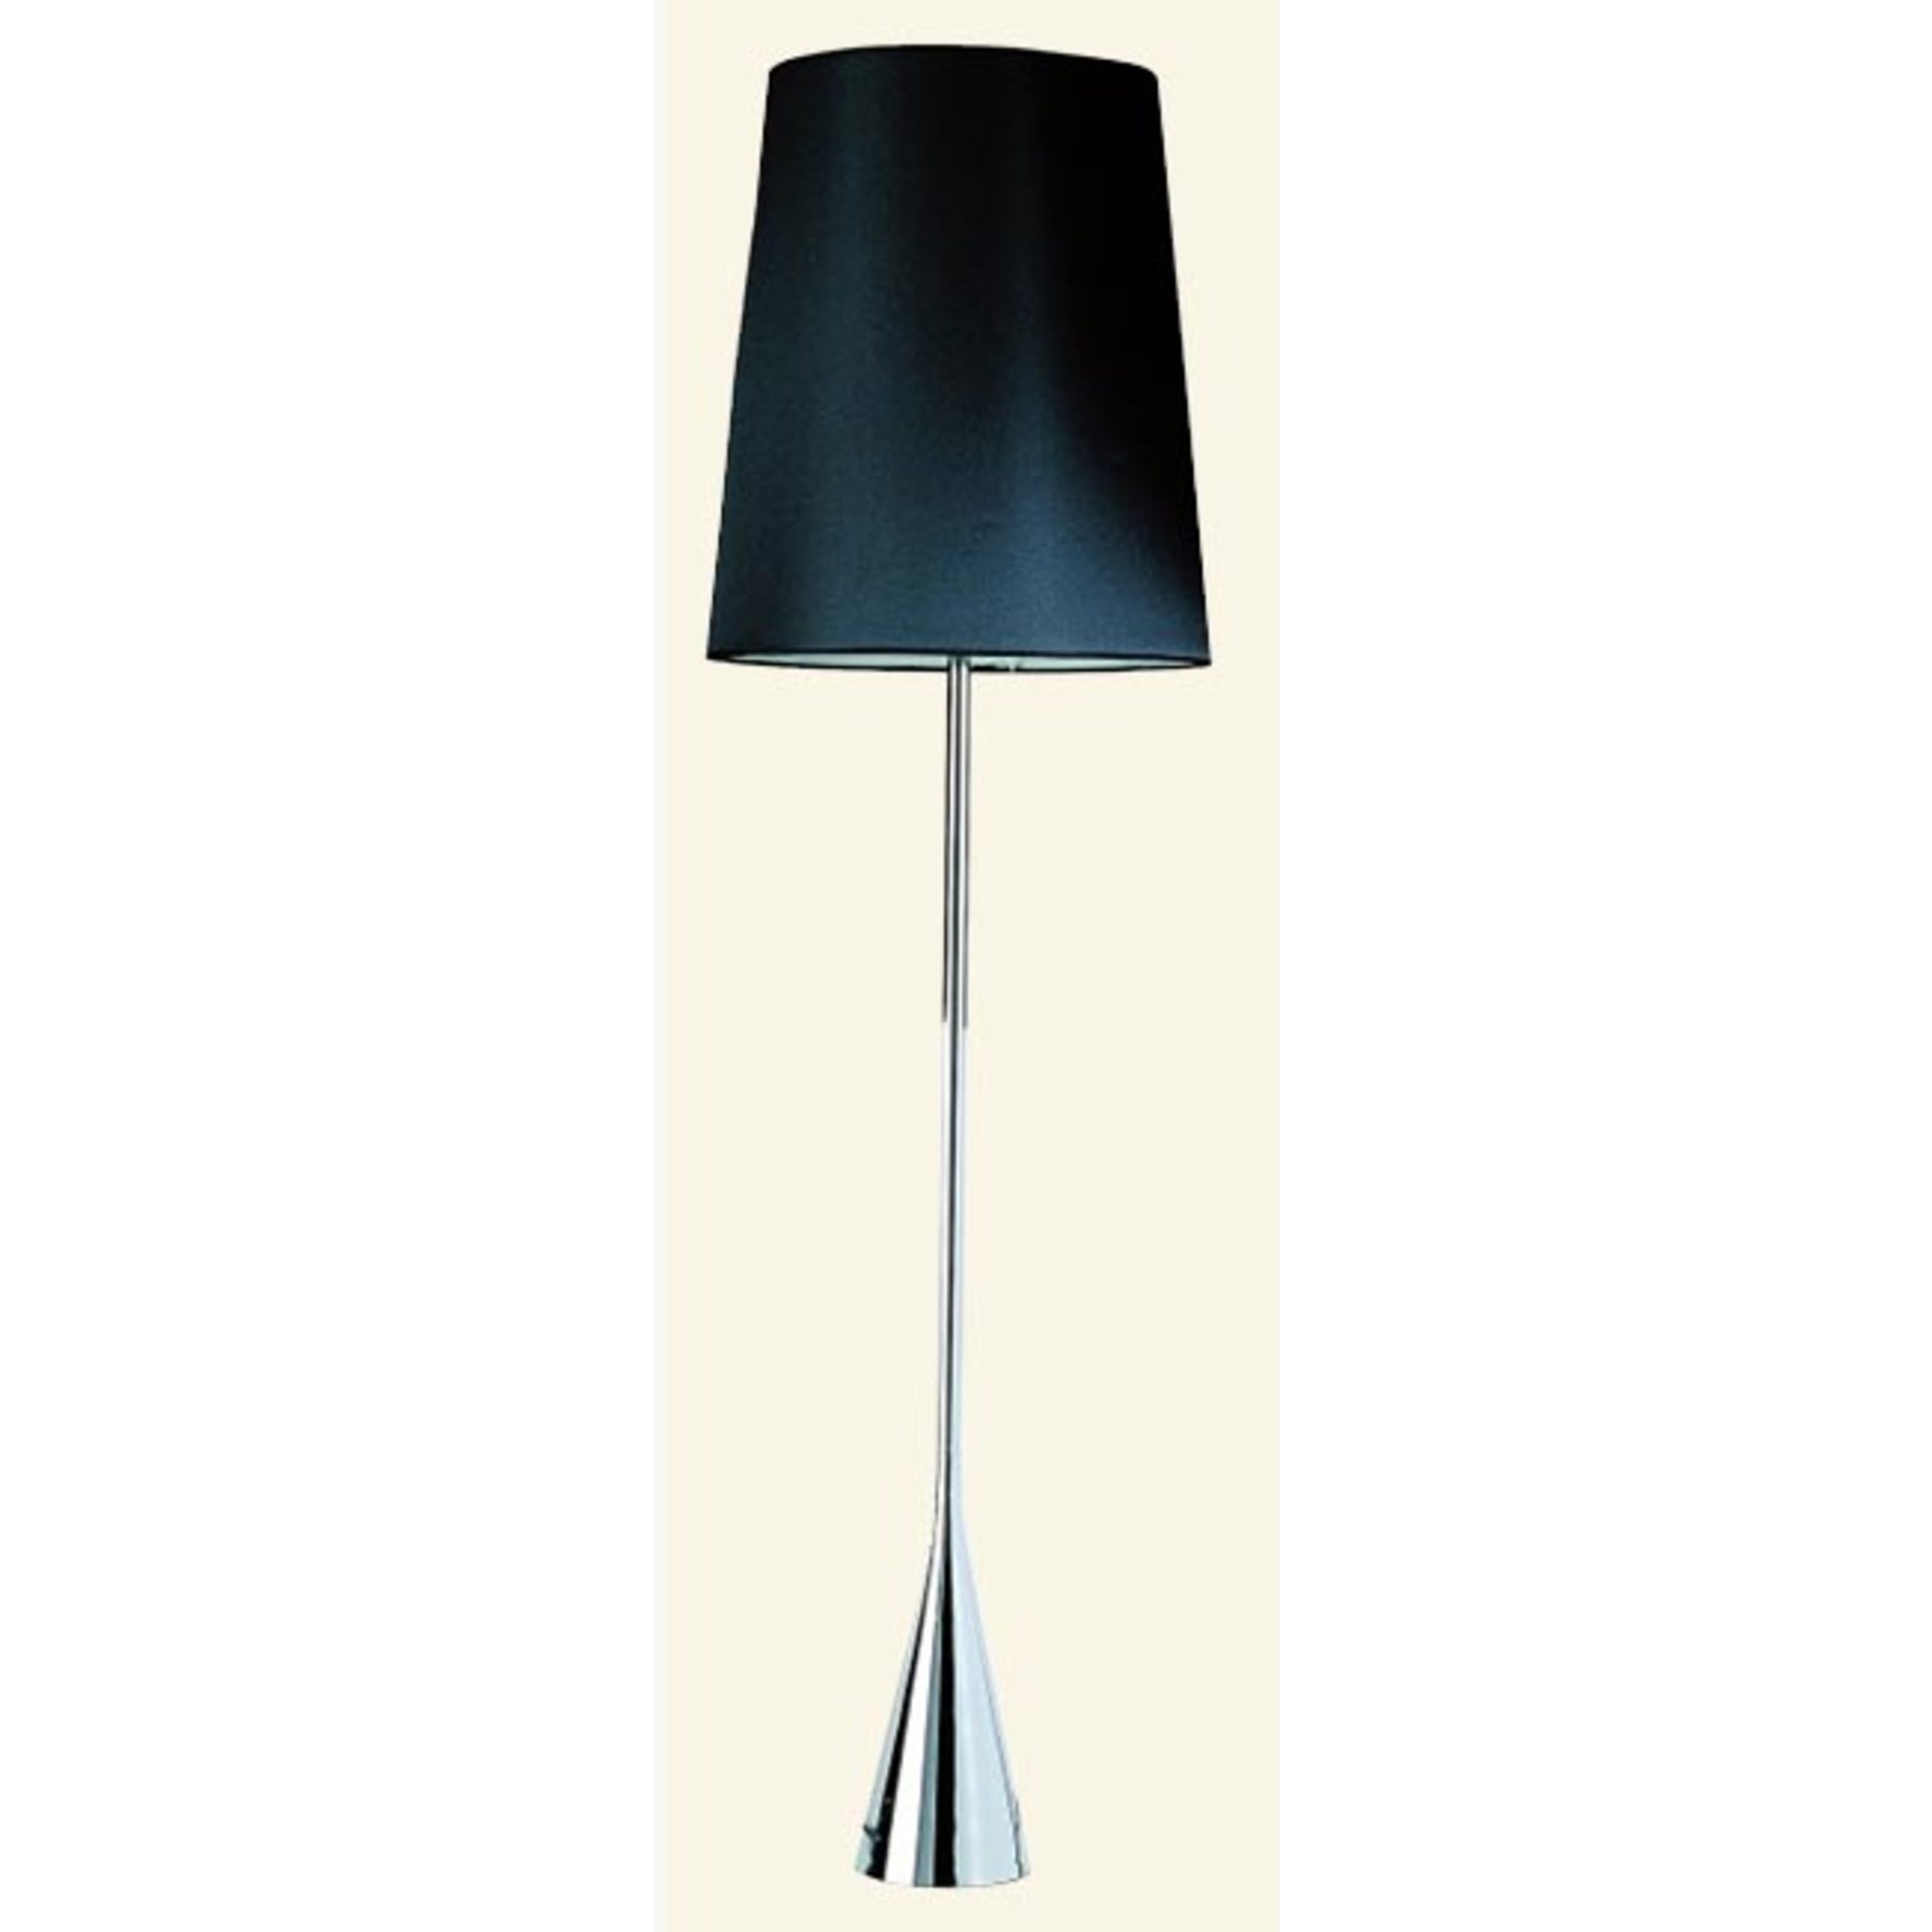 Contemporary Floor Lamp - Chrome and Black